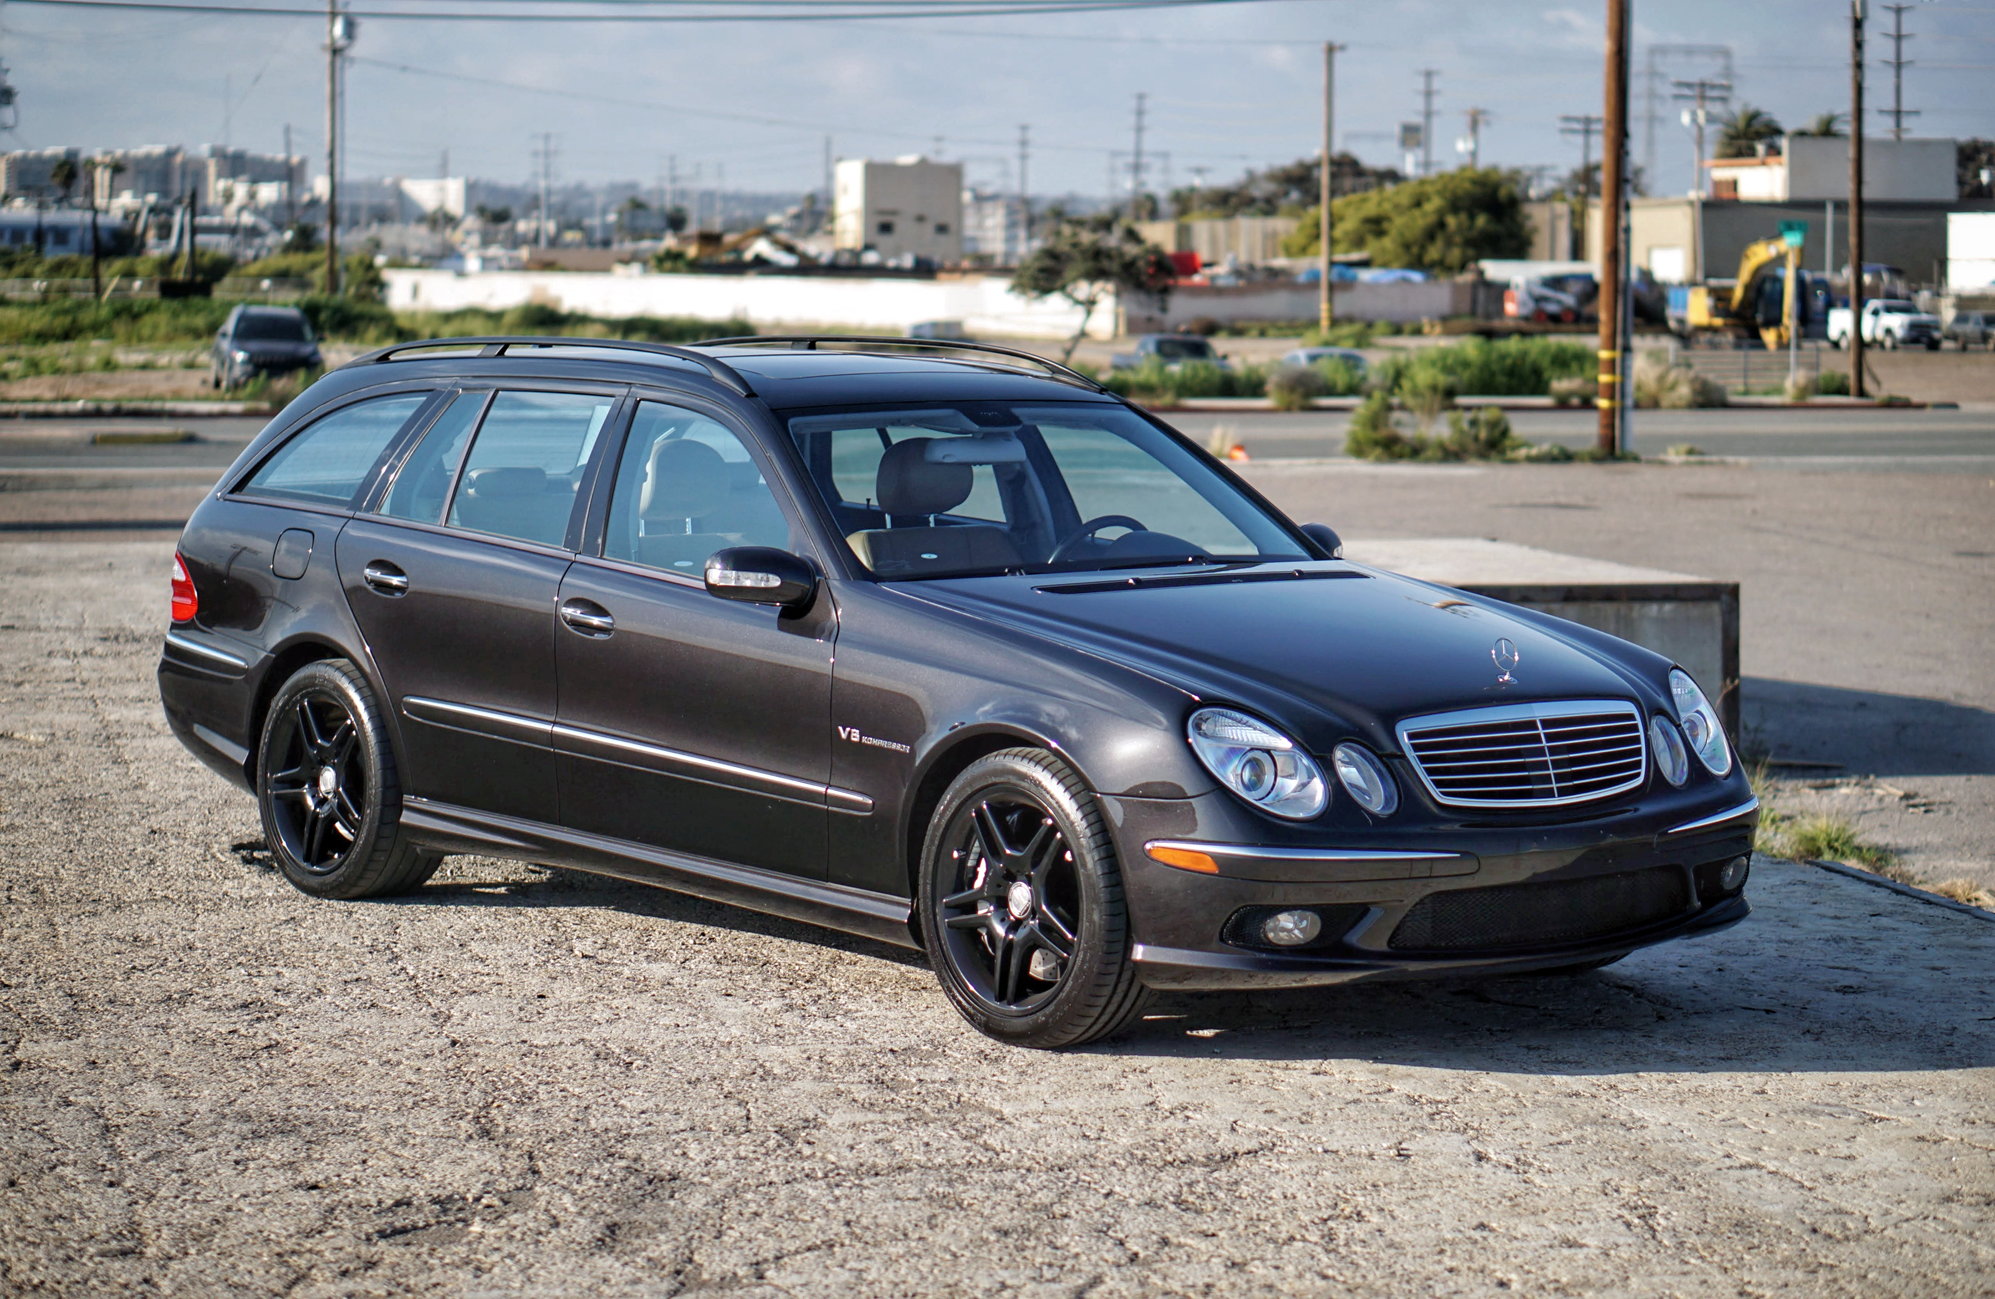 2006 Mercedes-Benz E55 AMG - FS:  2006 Mercedes-Benz e55 AMG Wagon / DESIGNO PACKAGE / 1 Of 6 Produced! - Used - VIN WDBUH76J16A936682 - 123,000 Miles - 8 cyl - 2WD - Automatic - Wagon - Other - Coronado, CA 92118, United States